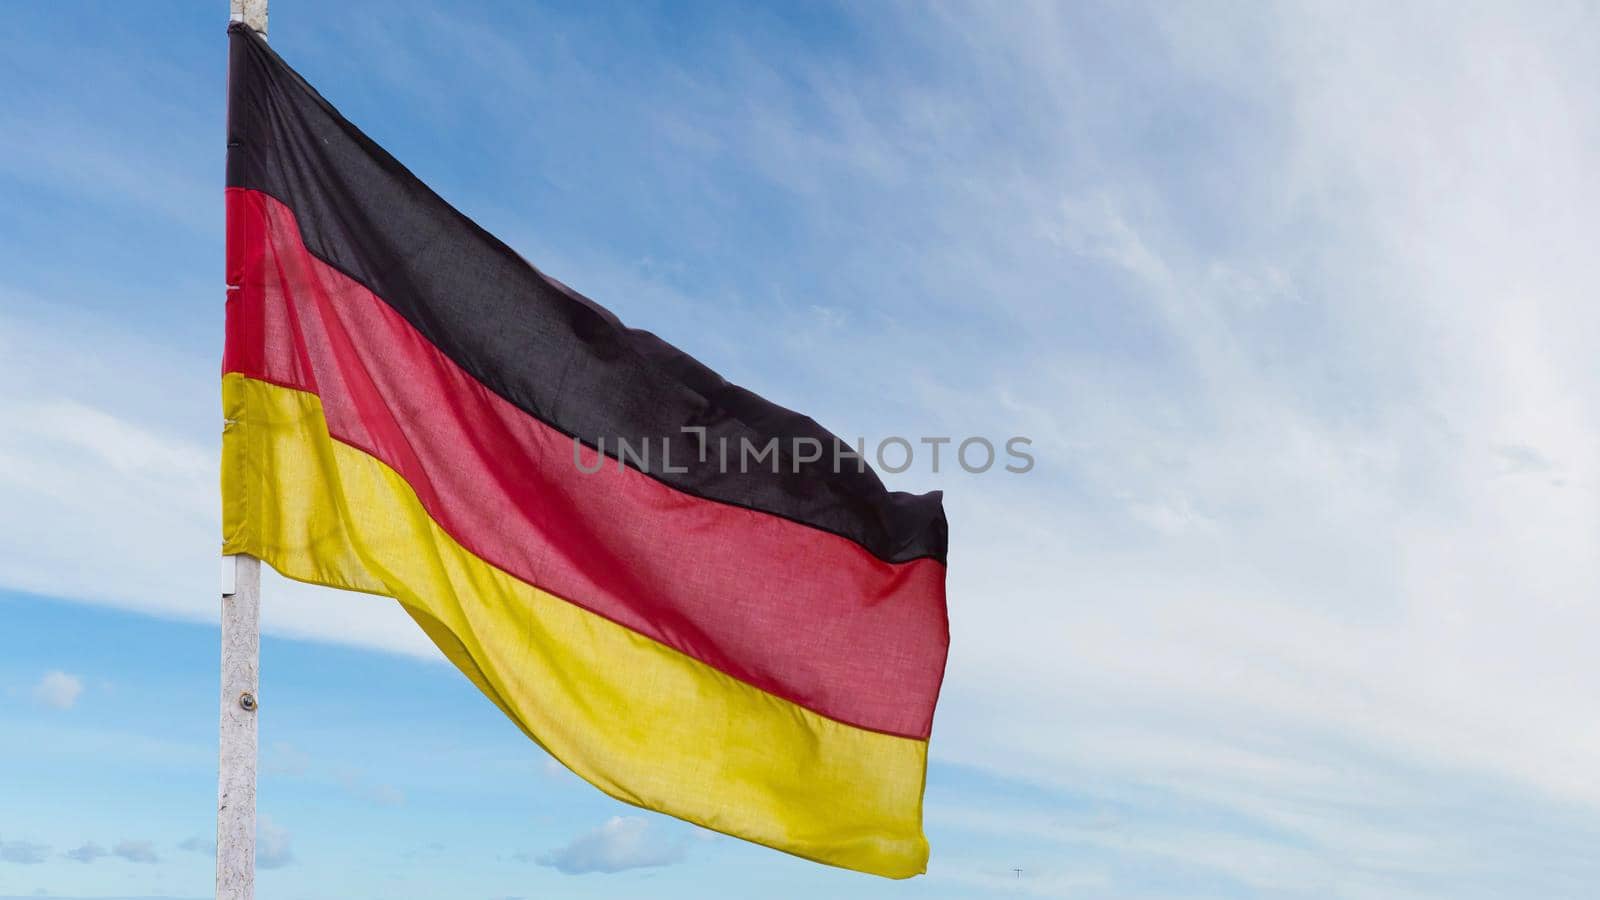 The official flag of Germany waving on a blue sky background. Horizontal banner design, with the German flag hanging on a sunny background with white clouds. Deutschland flag wide banner.